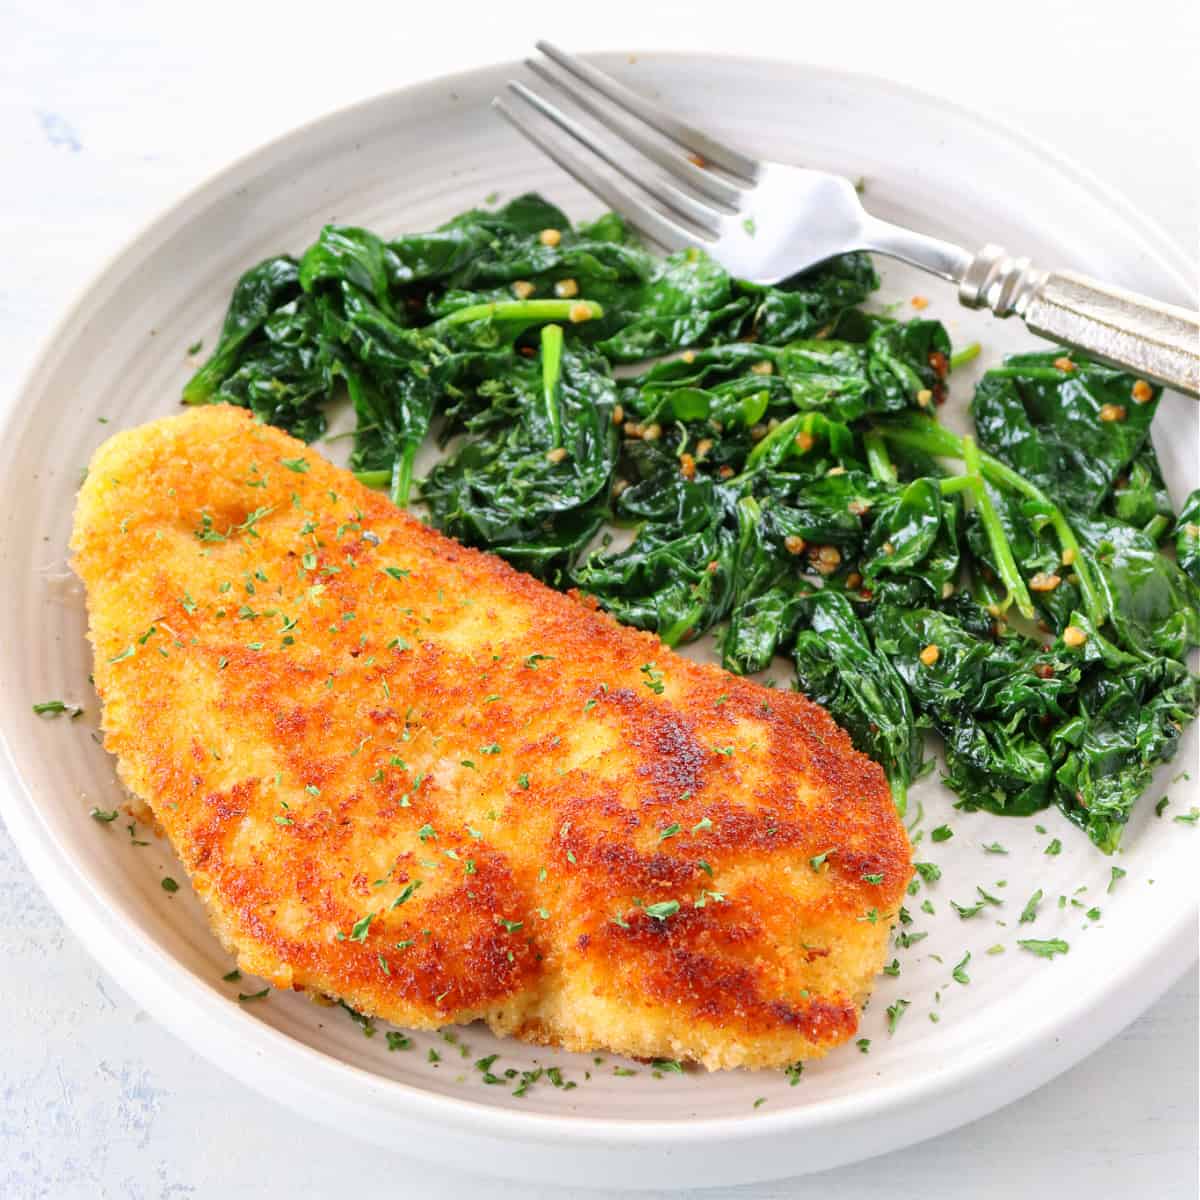 Breaded chicken on a plate with spinach.